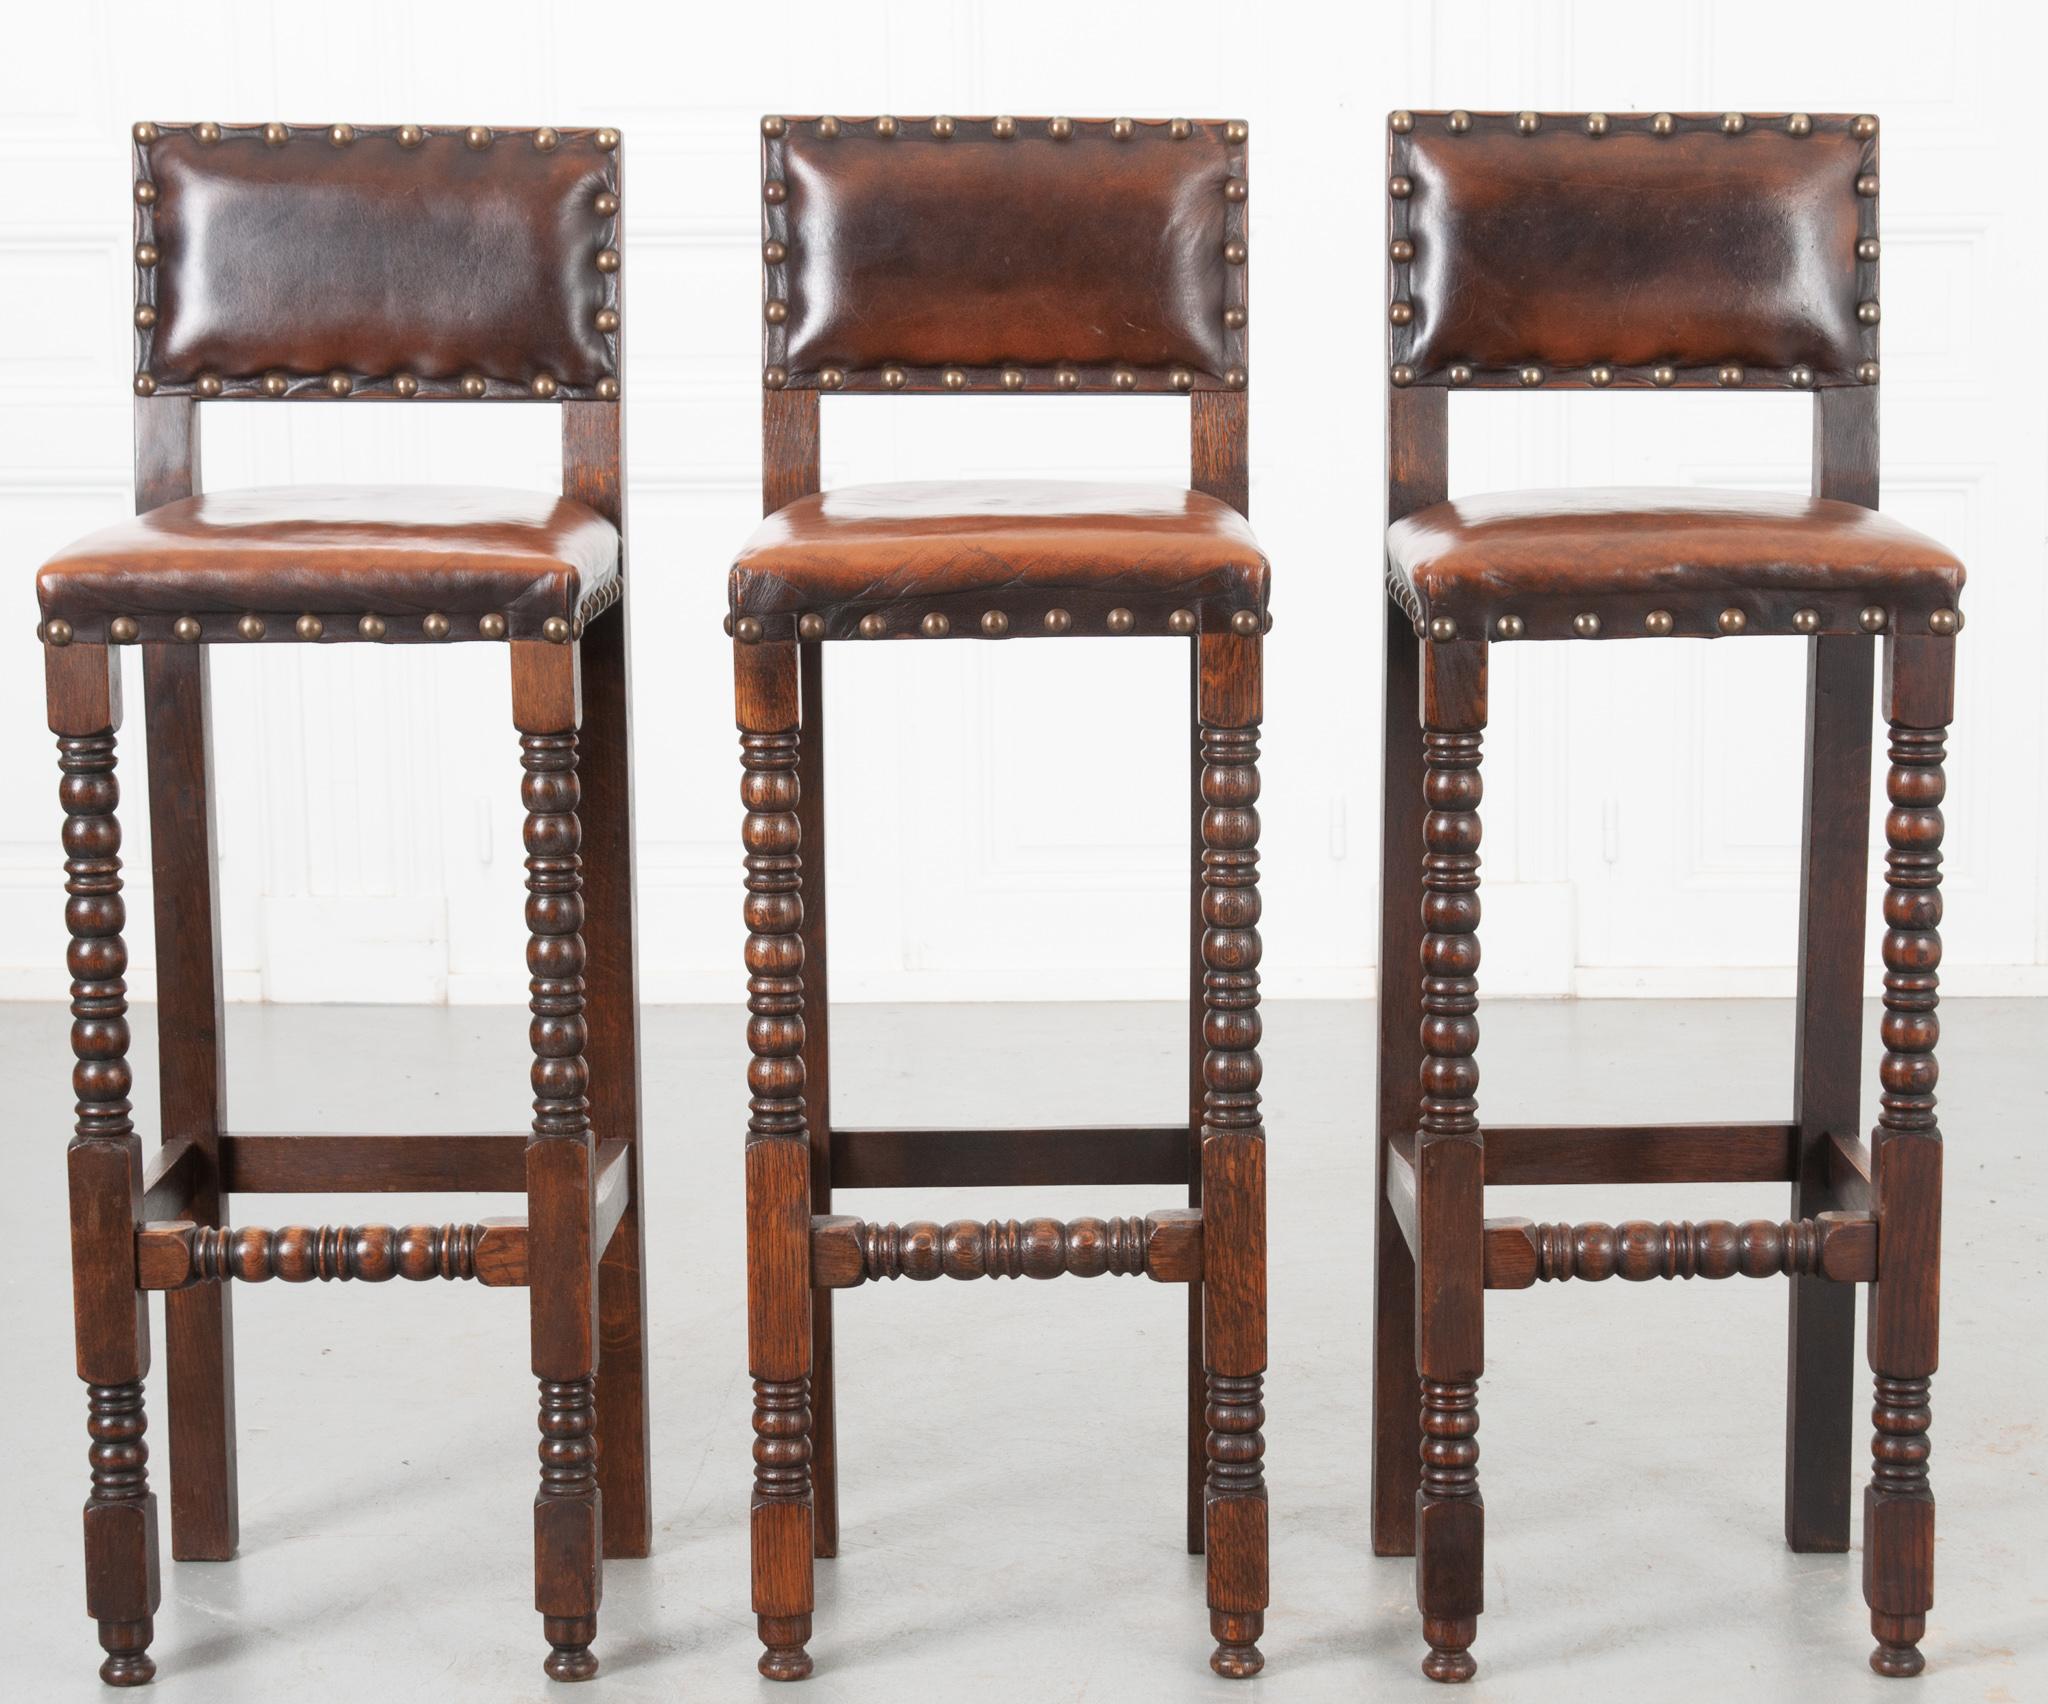 leather furniture for pubs